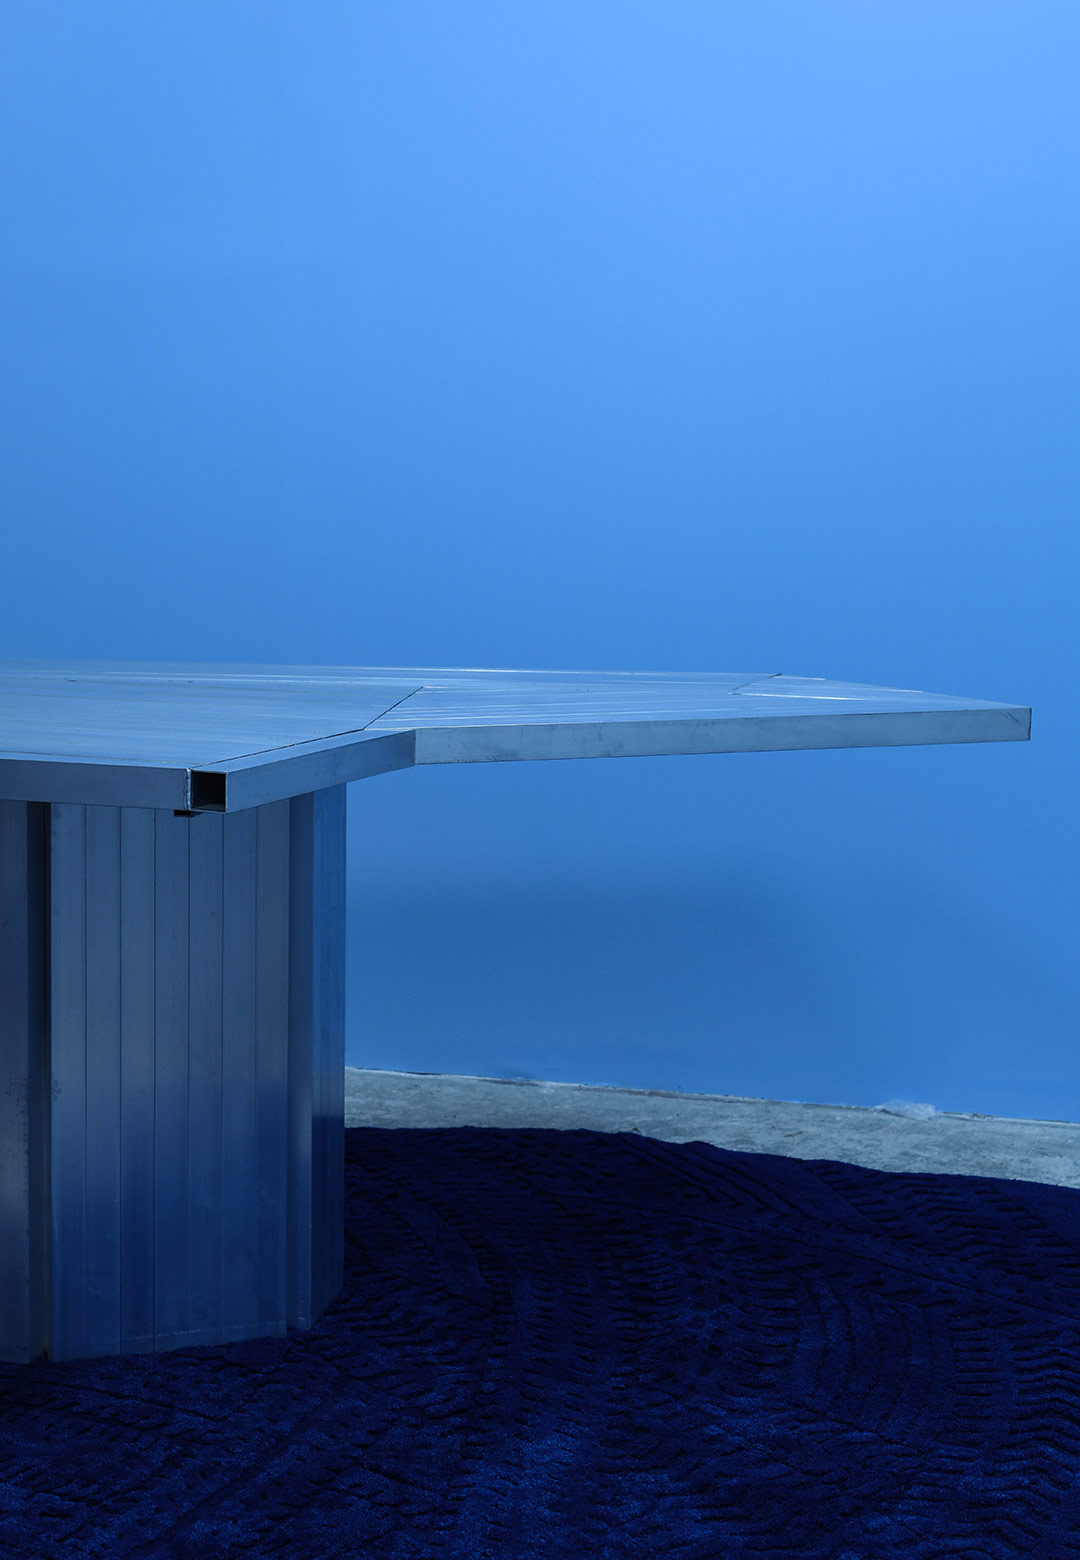 ‘Blue Steel’ by GSL Gallery is a tribute to the influence of steel and aluminium in design